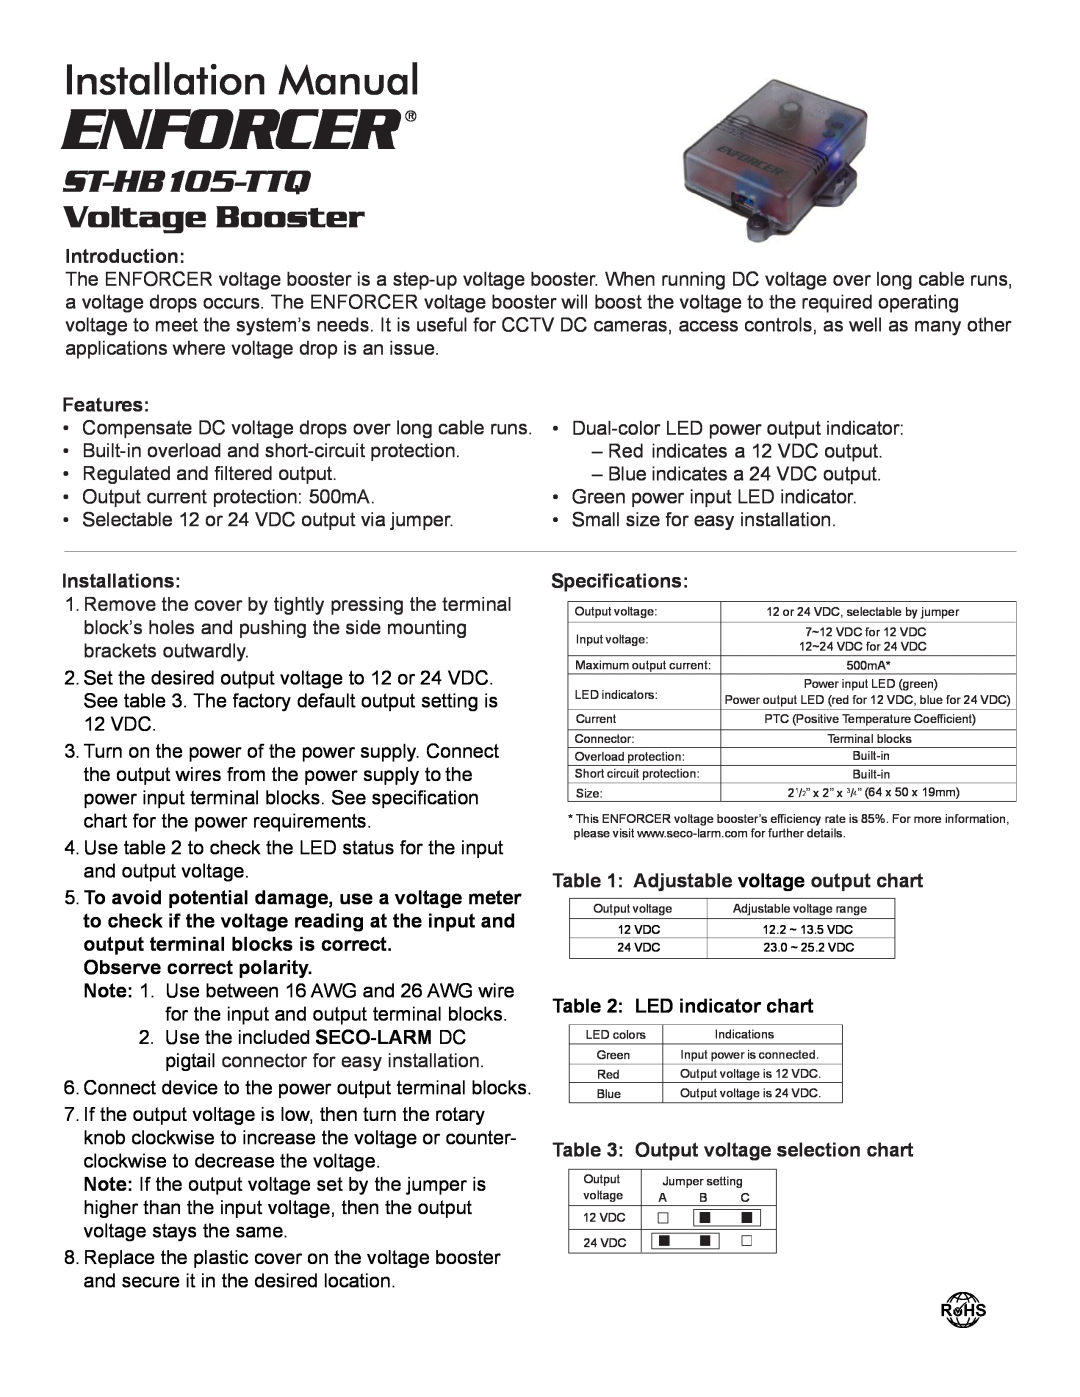 SECO-LARM USA ST-HB105-TTQ installation manual Introduction, Features, Installations, Specifications, Enforcer 